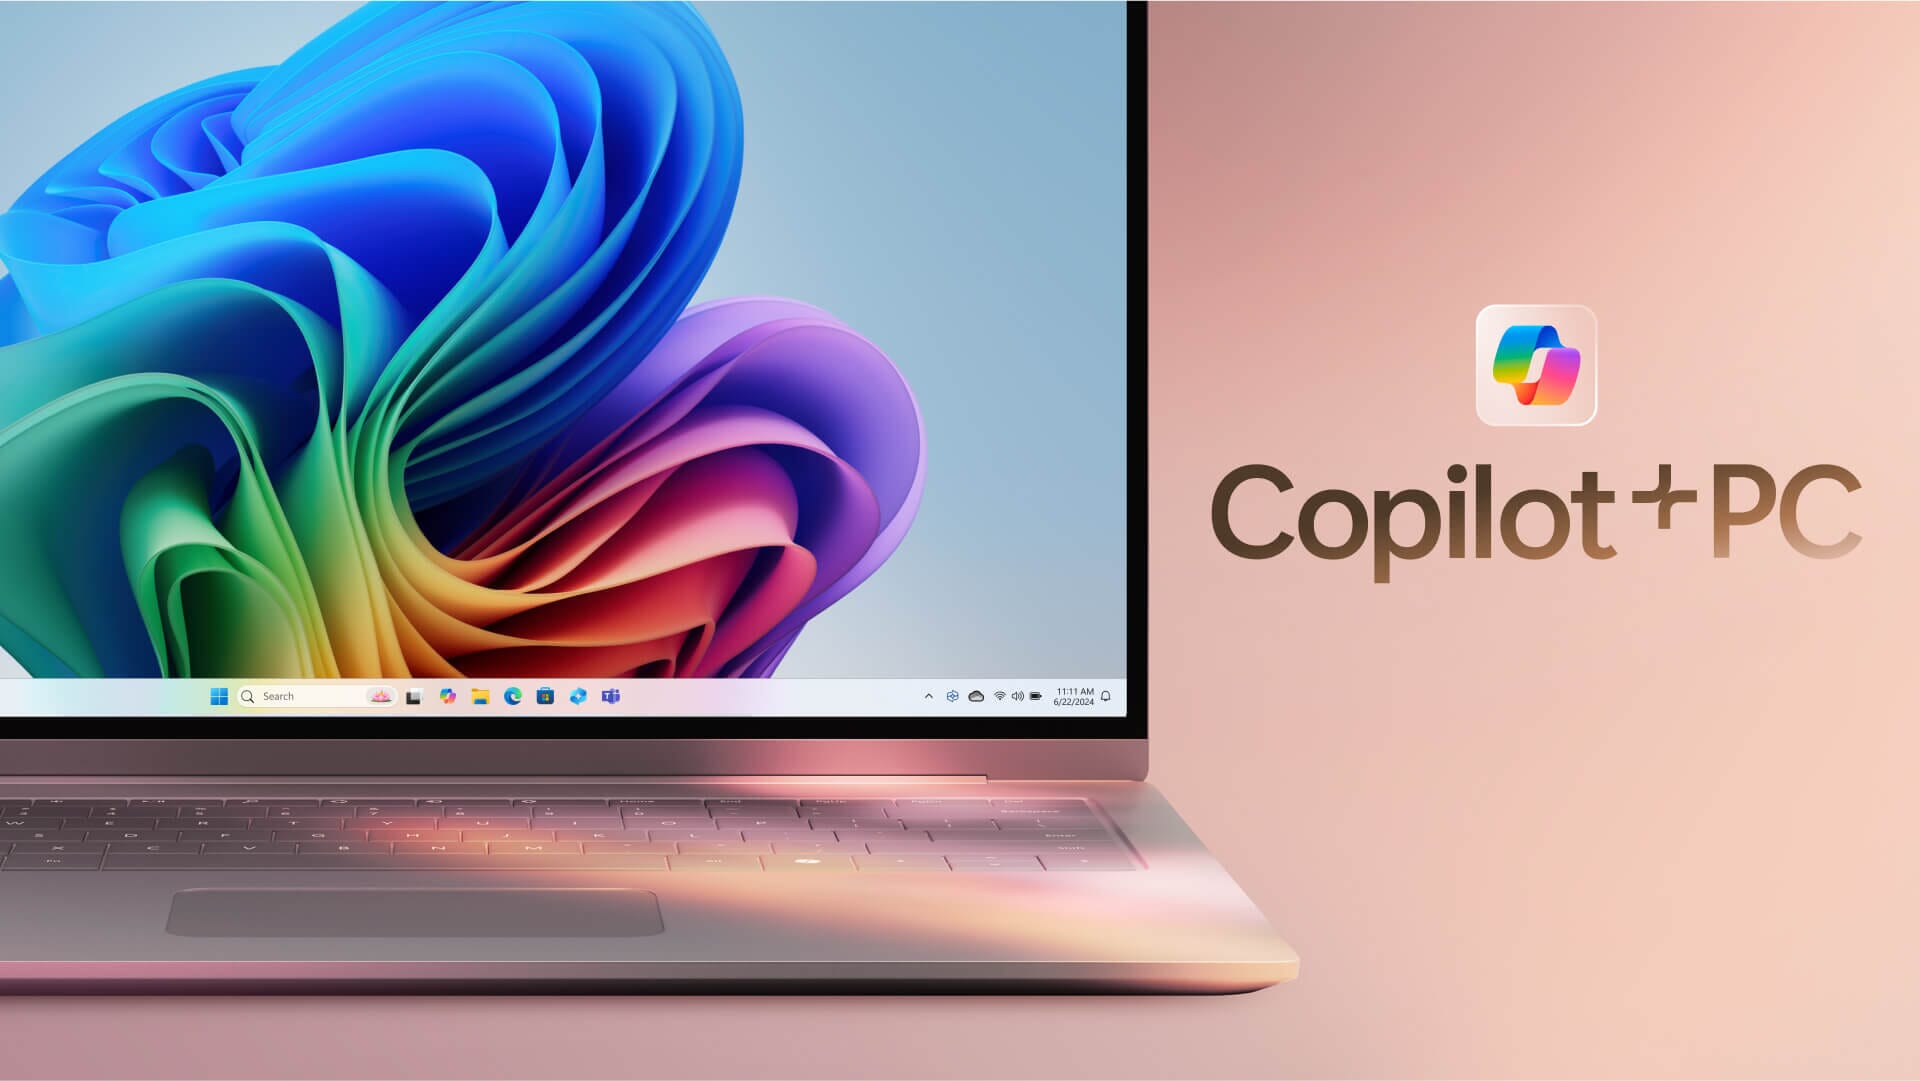 Microsoft and Other OEMs Introduced Copilot+ PCs